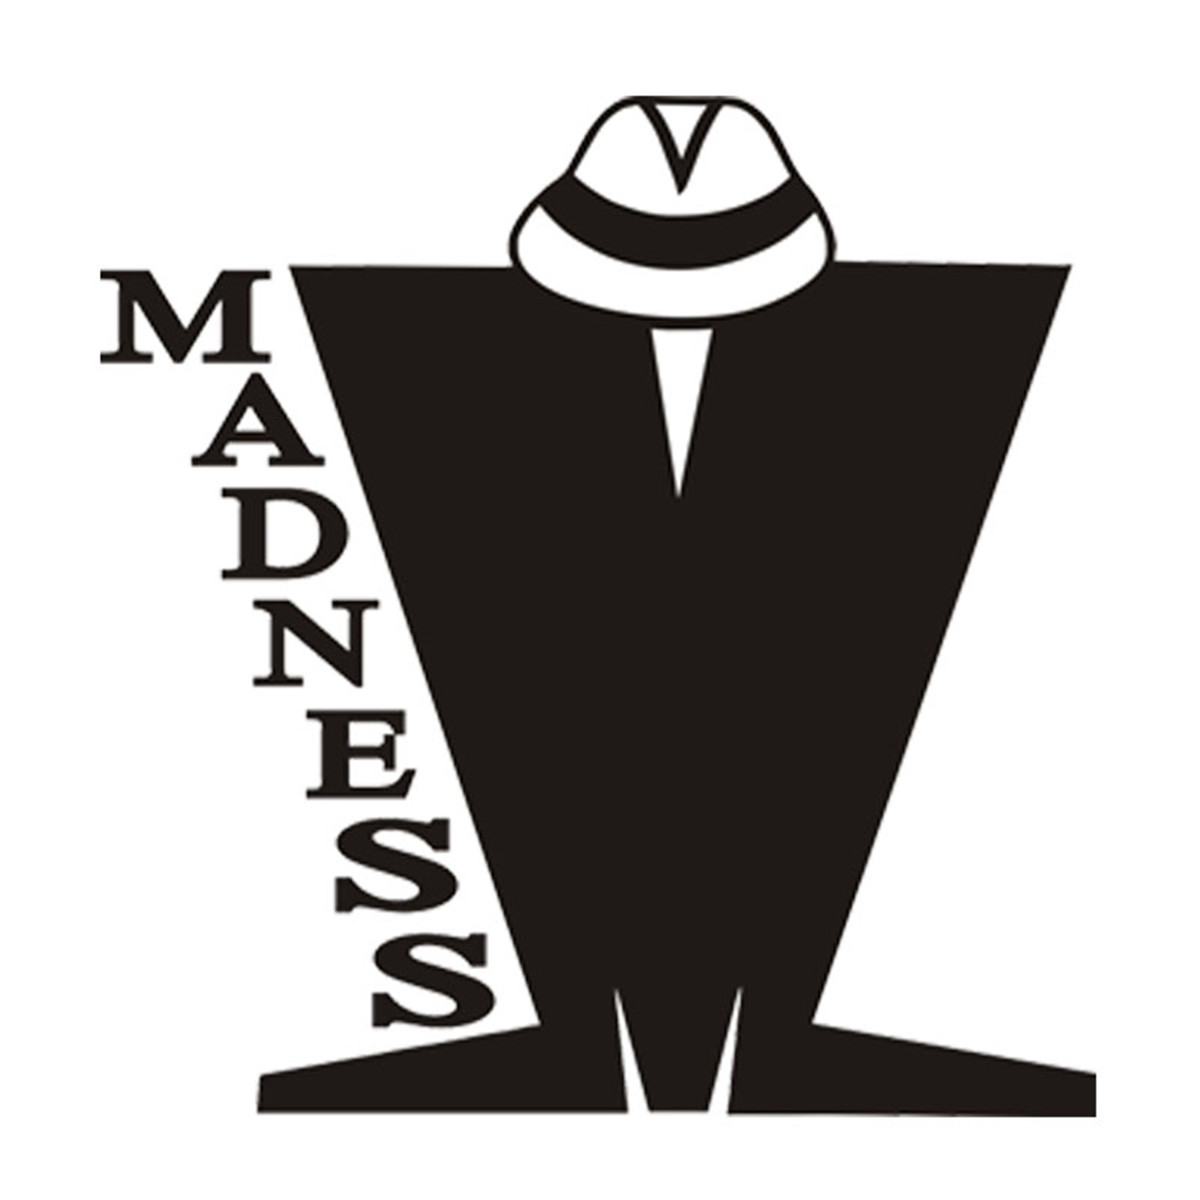 2pcs-madness-sign-vinyl-car-sticker-decal-music-band-graphic-group